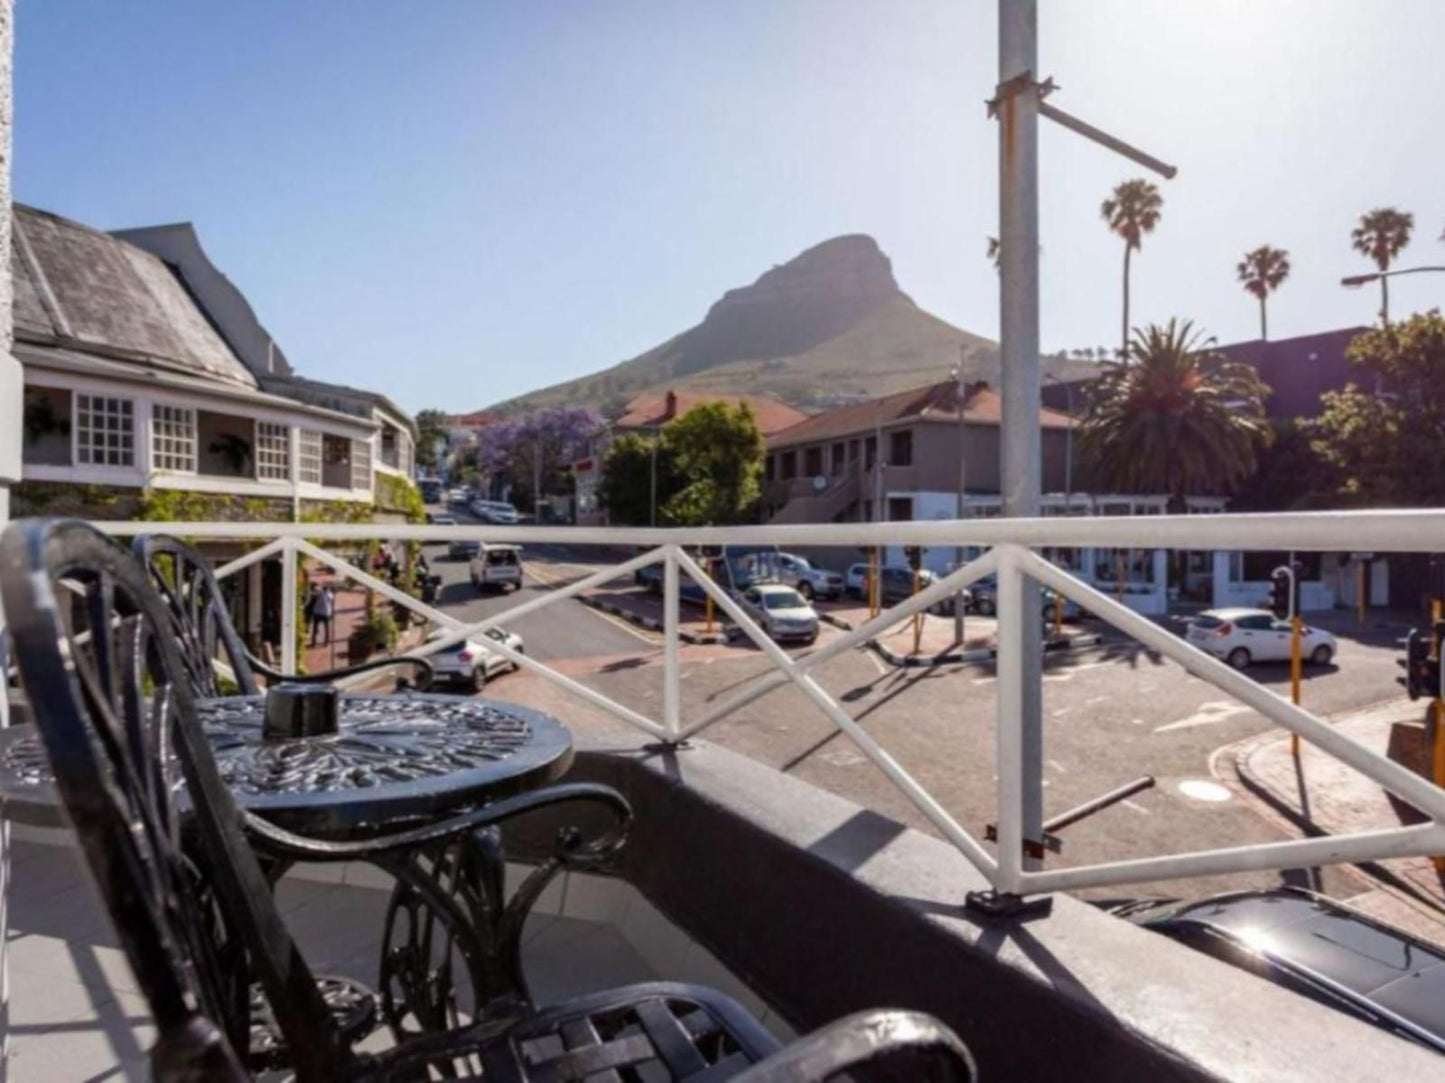 Cloud 9 Boutique Hotel And Spa Tamboerskloof Cape Town Western Cape South Africa 